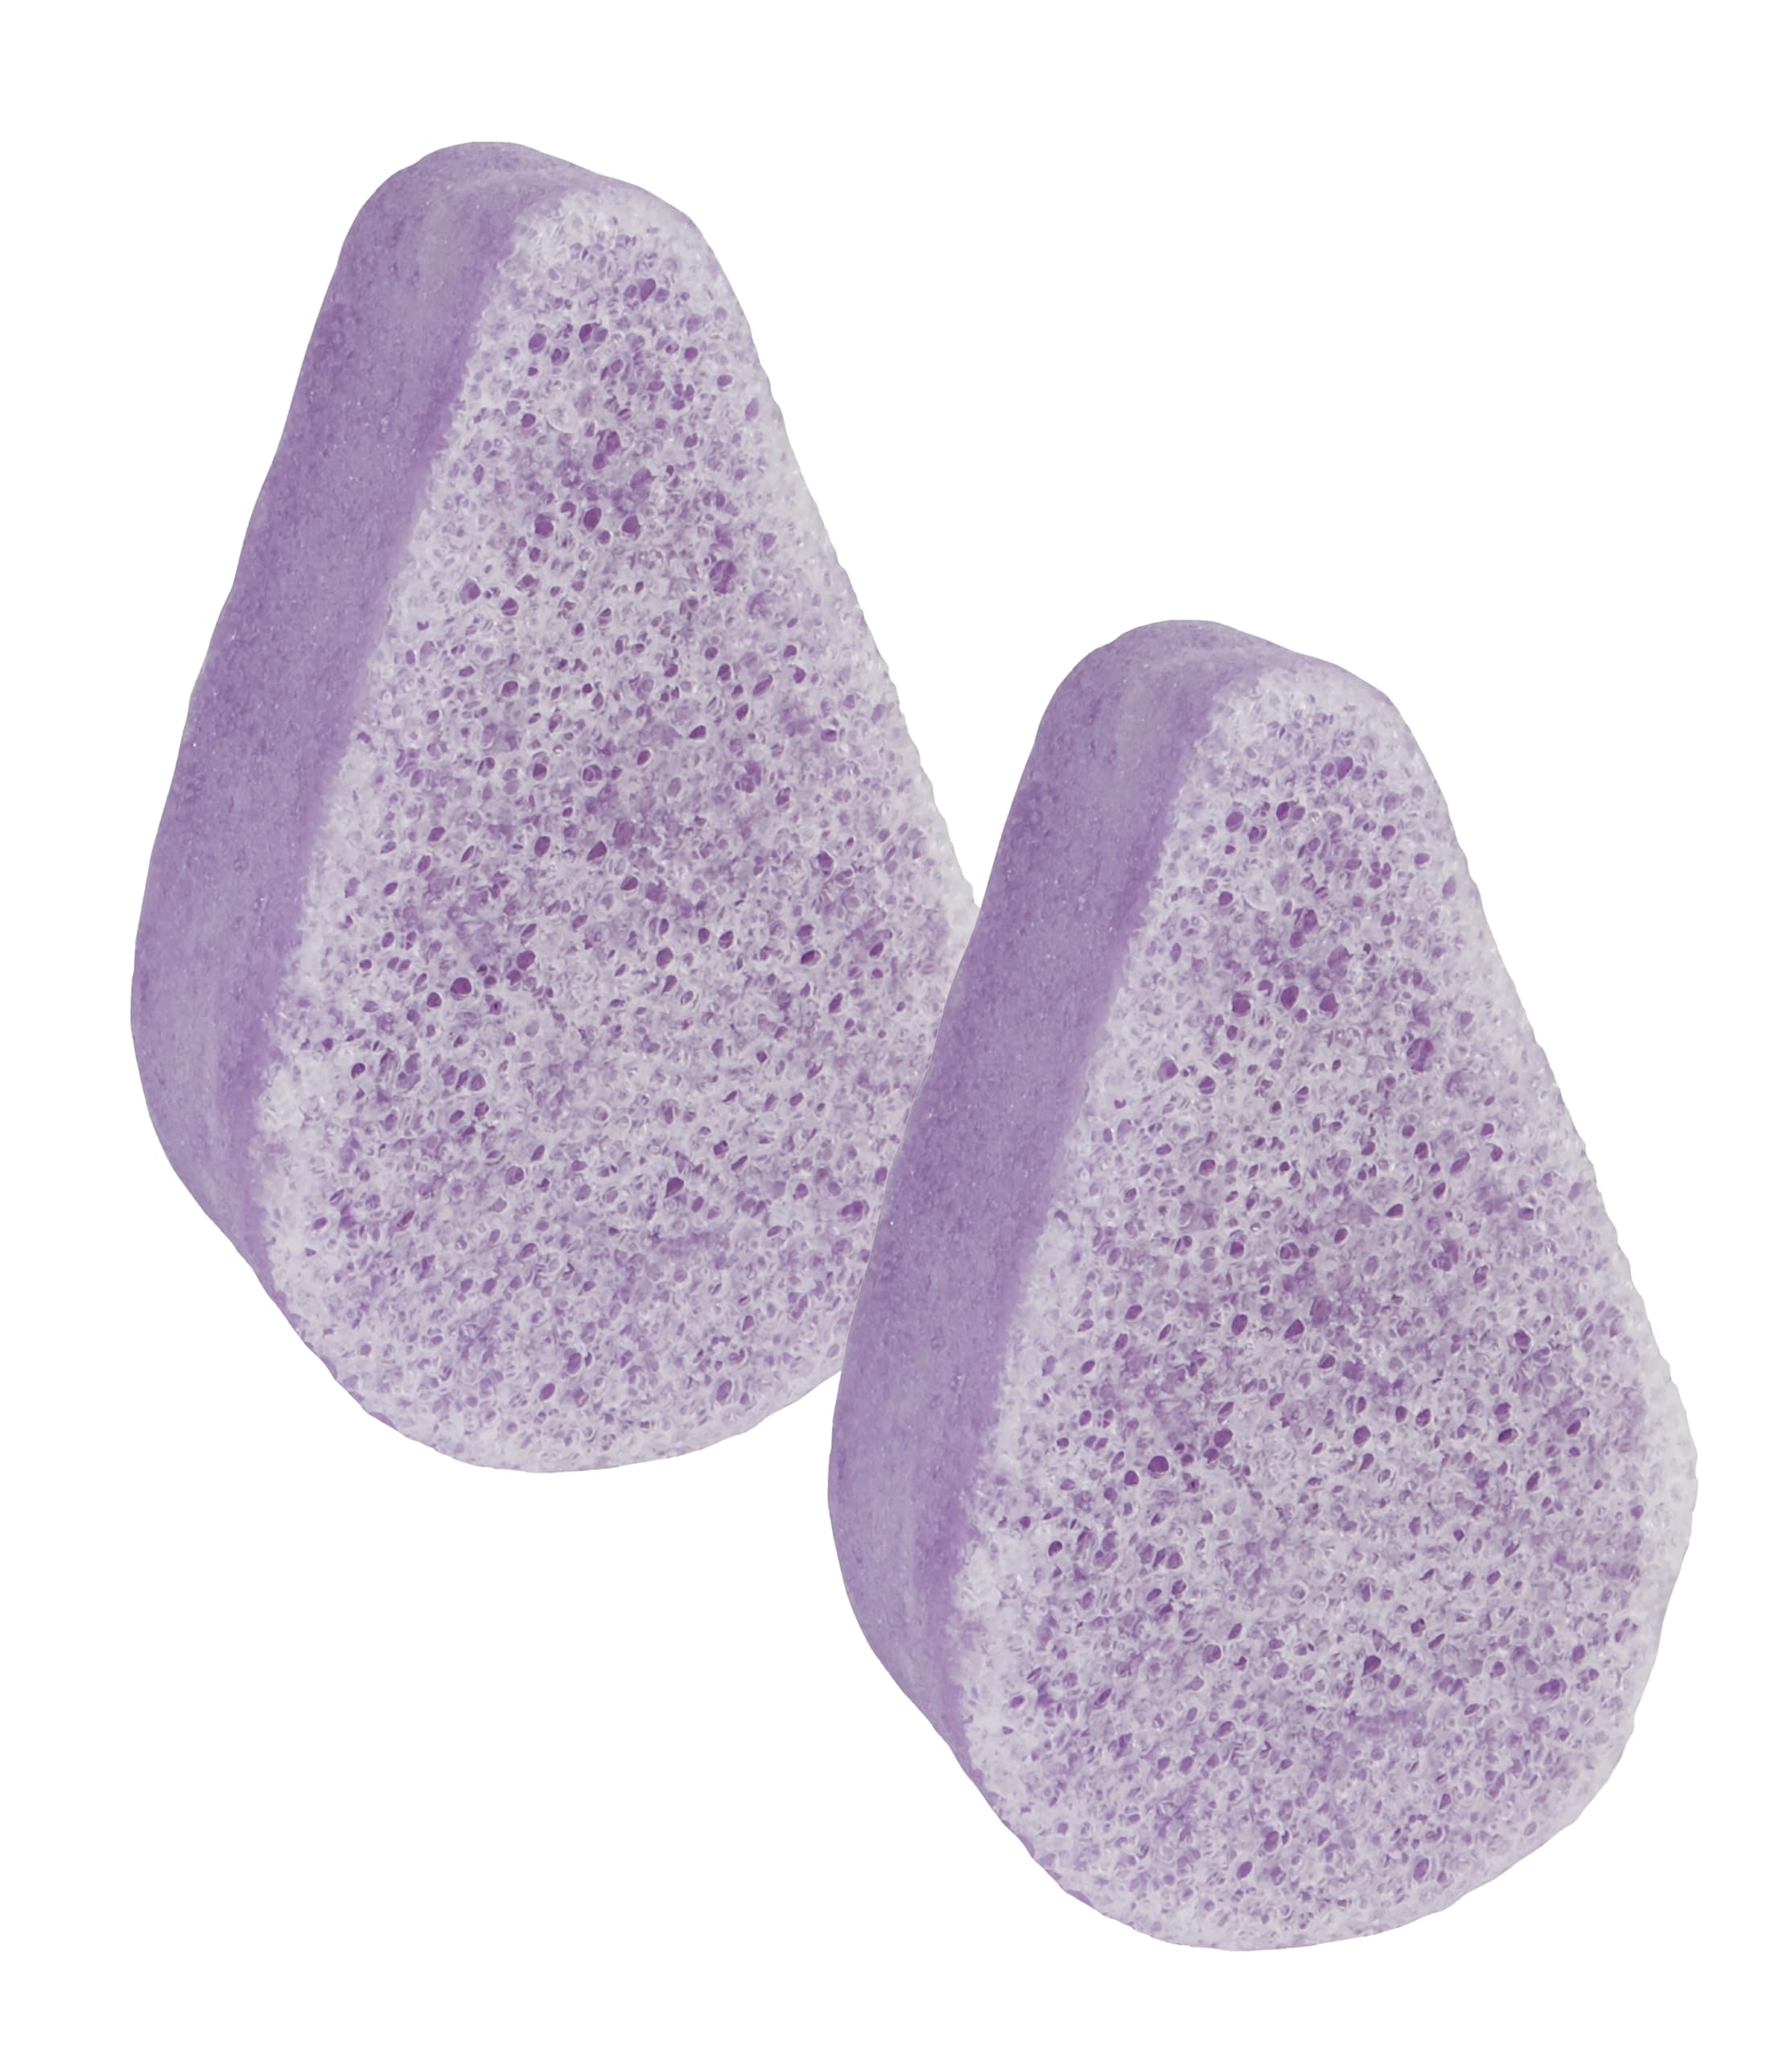 Spongeables Anti-Cellulite Body Wash in a Sponge, Moisturizer and Exfoliator, 20+ Washes, Lavender, 2 Count